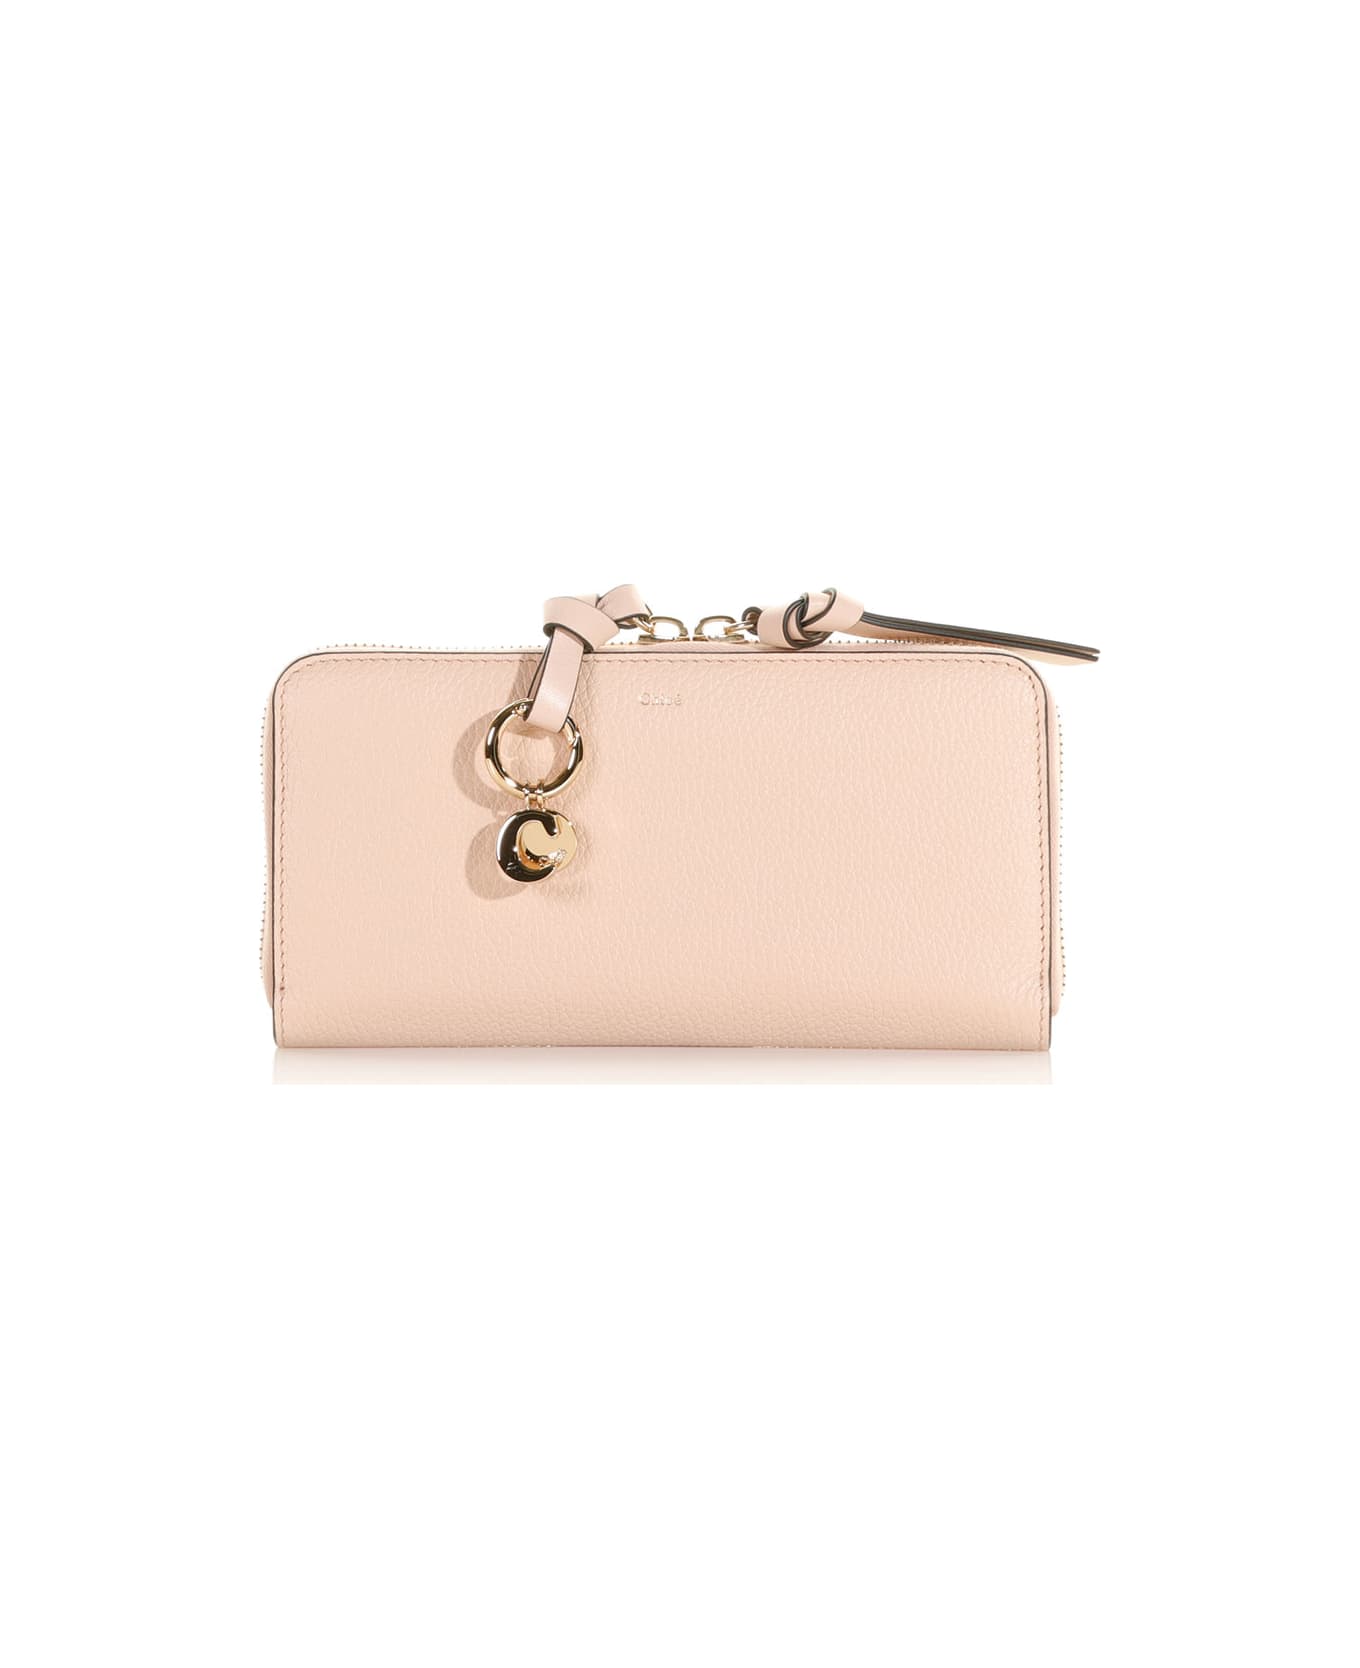 Chloé Full Zip Leather Wallet - CEMENT PINK 財布